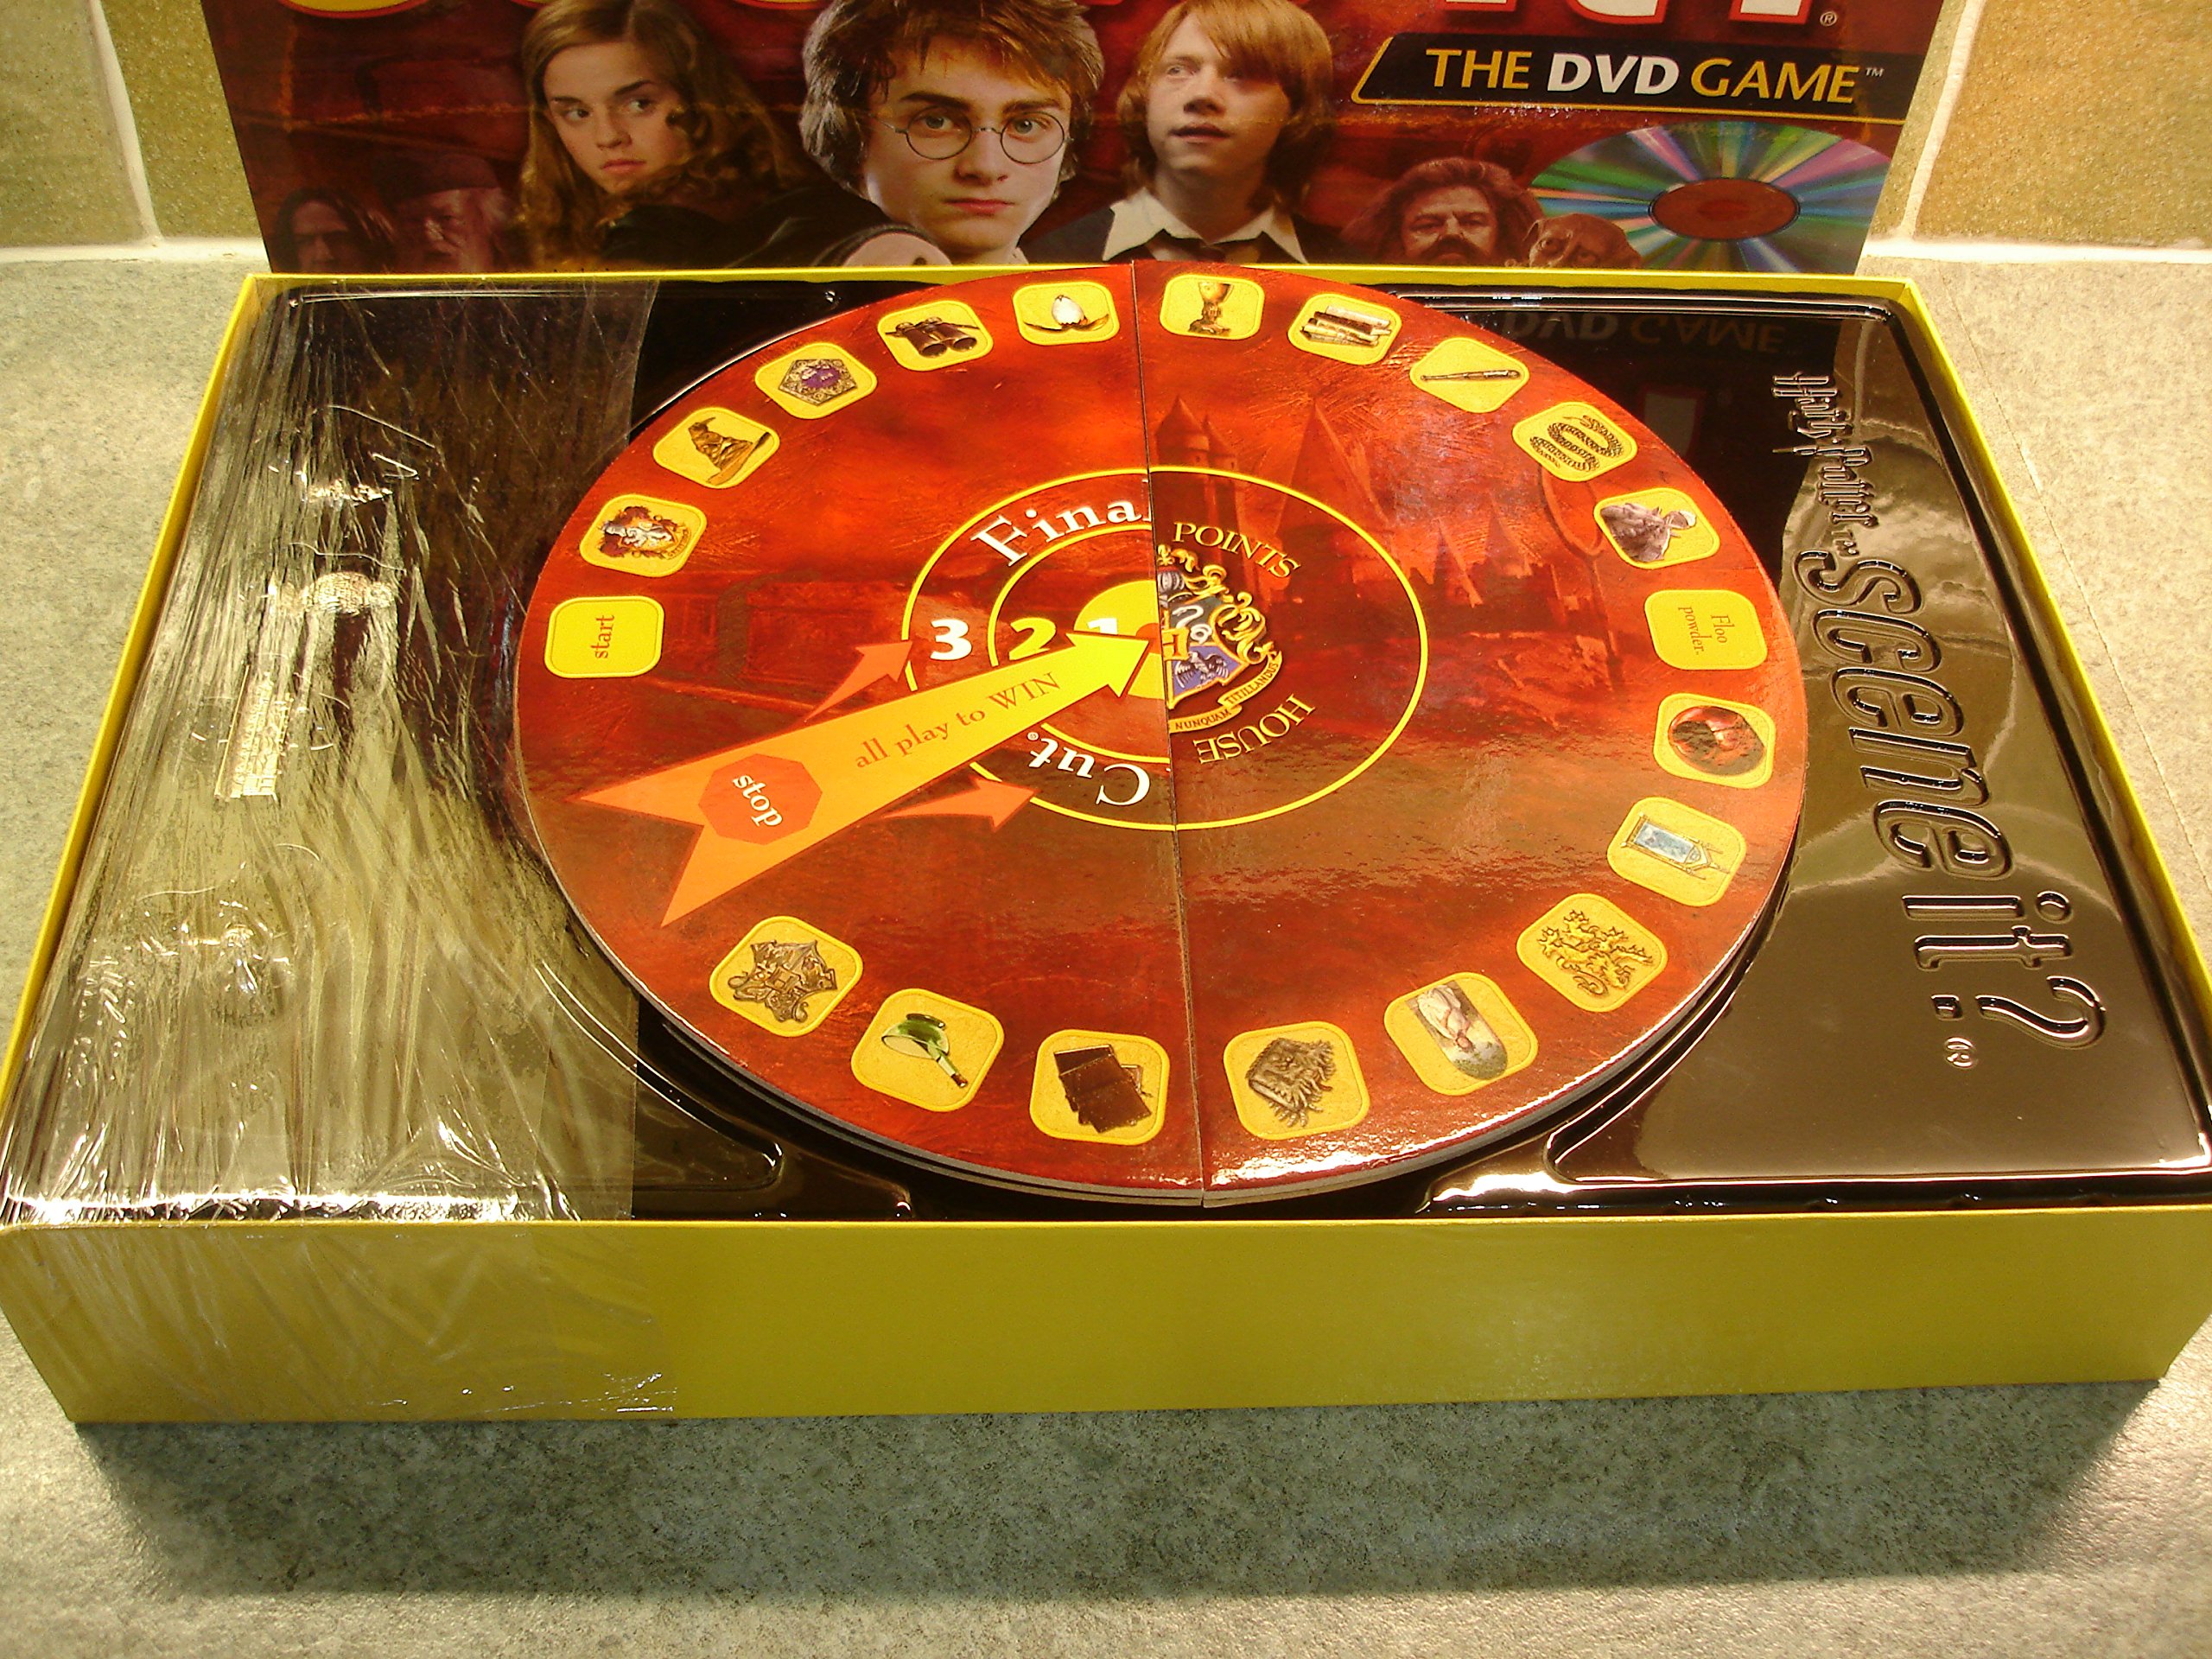 Harry Potter Scene It DVD Game With Bonus Images and Questions (2005 Edition) by Mattel